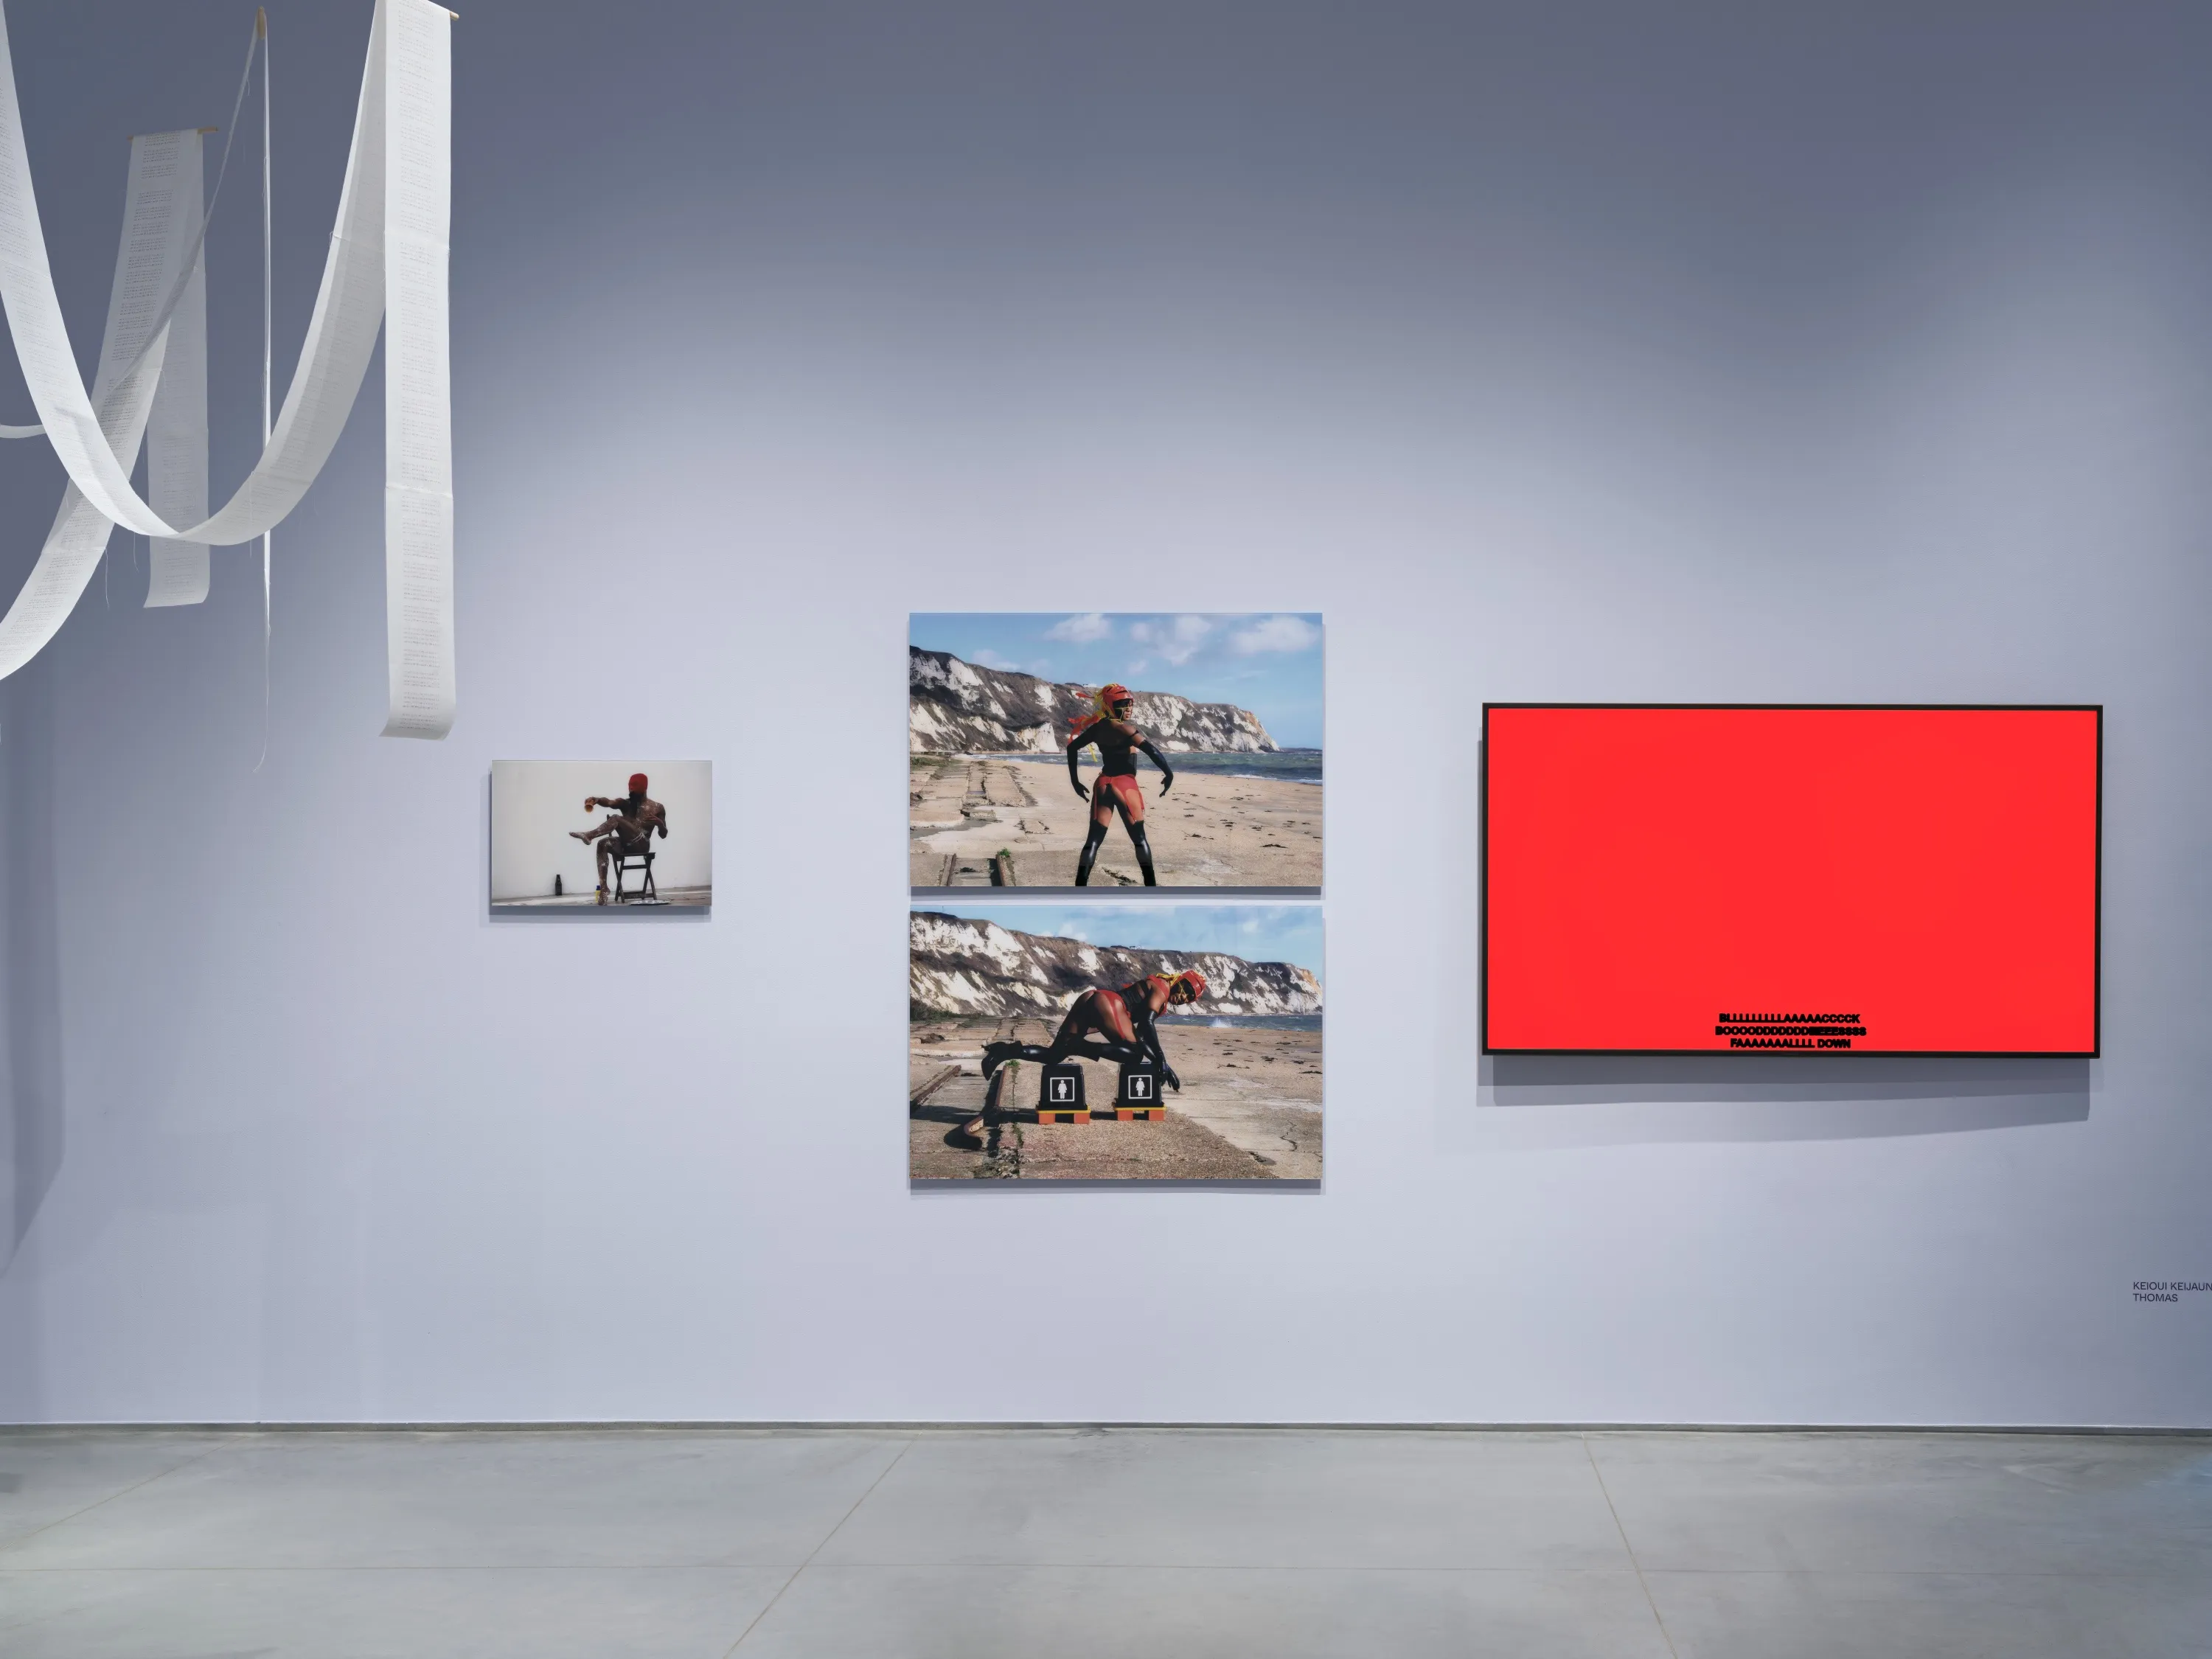 Gallery interior with light lavender walls and a gray floor. A part of an artwork installation of long ribbons of white paper is hanging to the left, and on the wall are three photographs mounted on the wall depicting a Black femme person in different poses. And to the right is a large monitor showing a bright red screen with black text captions at the bottom.